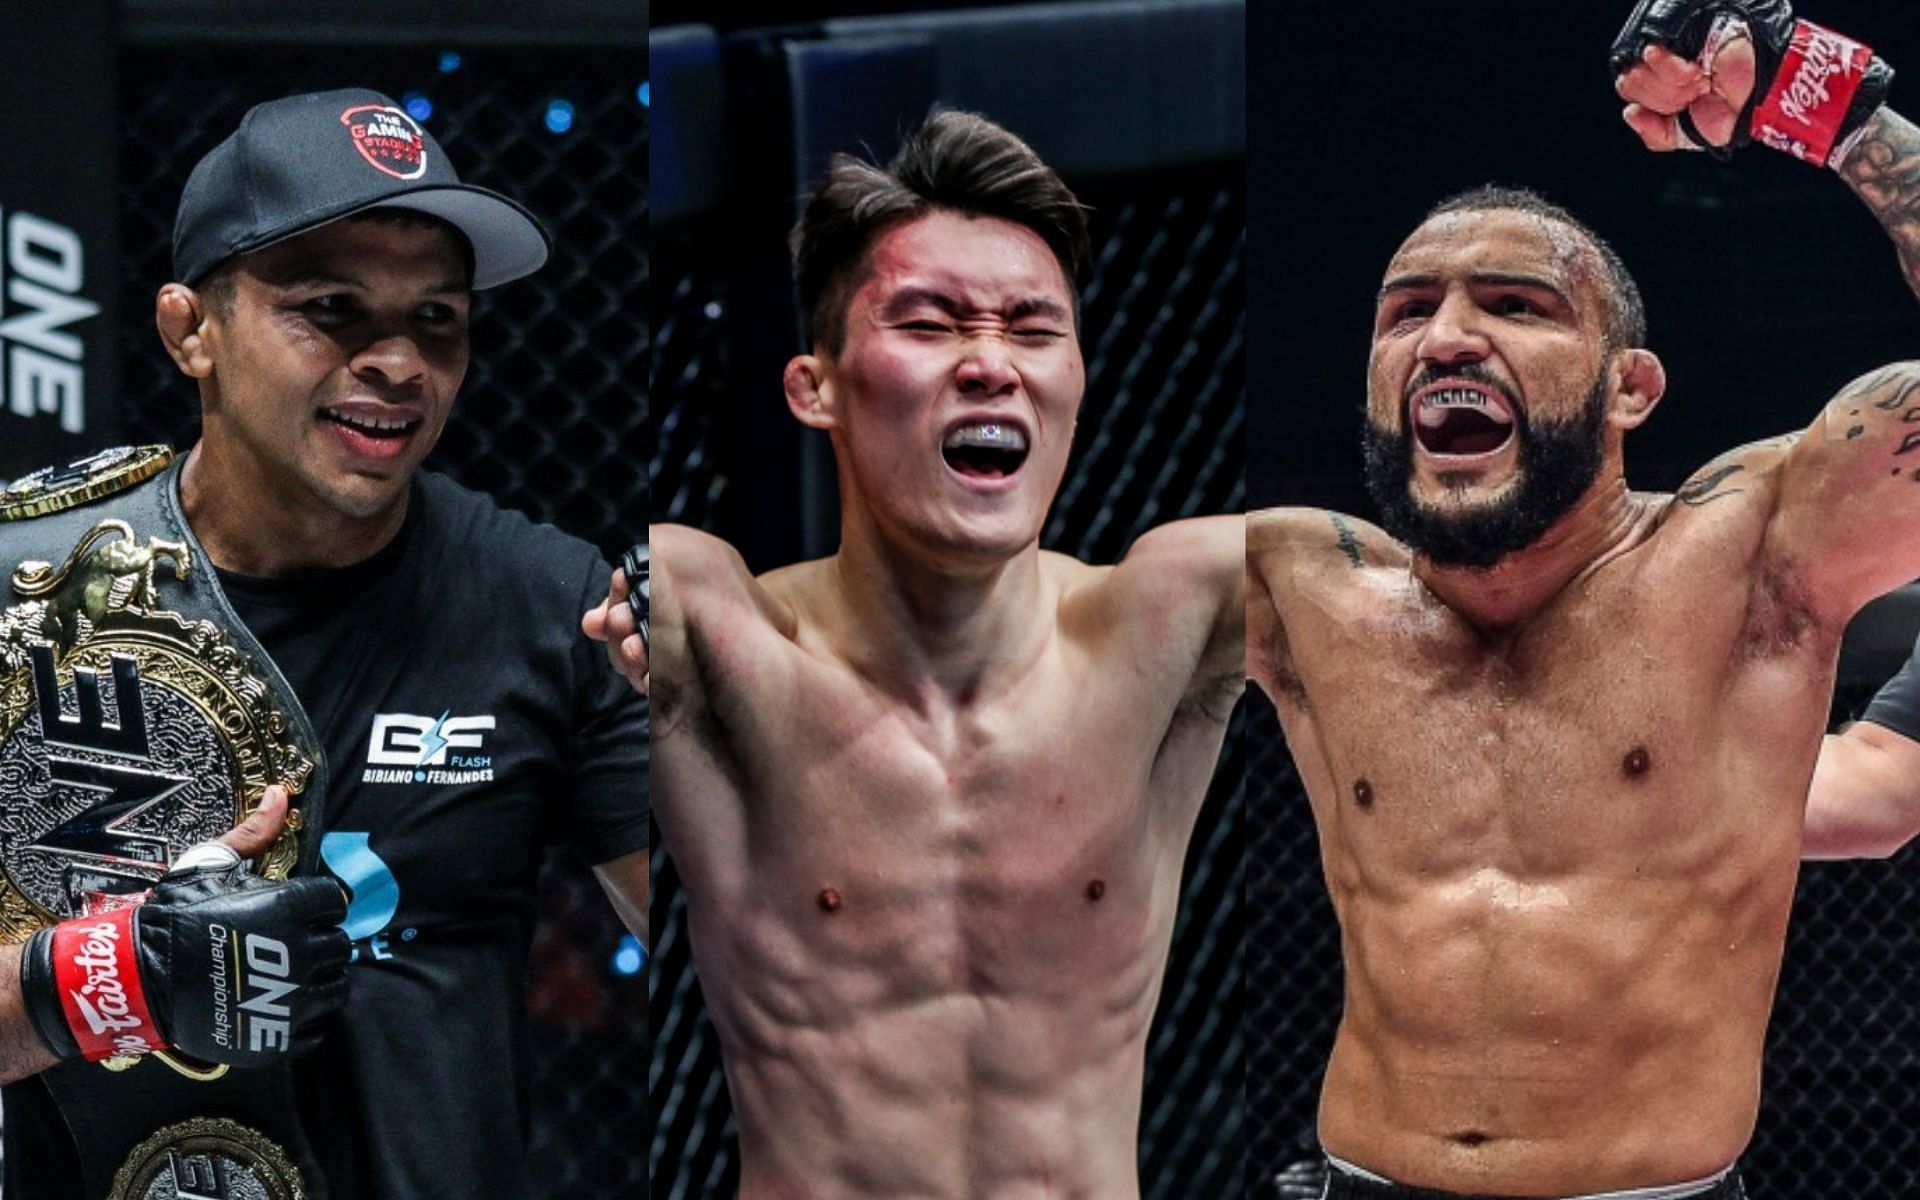 Kwon Won Il (center) roots for John Lineker (right) to win over Bibiano Fernandes (left) | Photo: ONE Championship